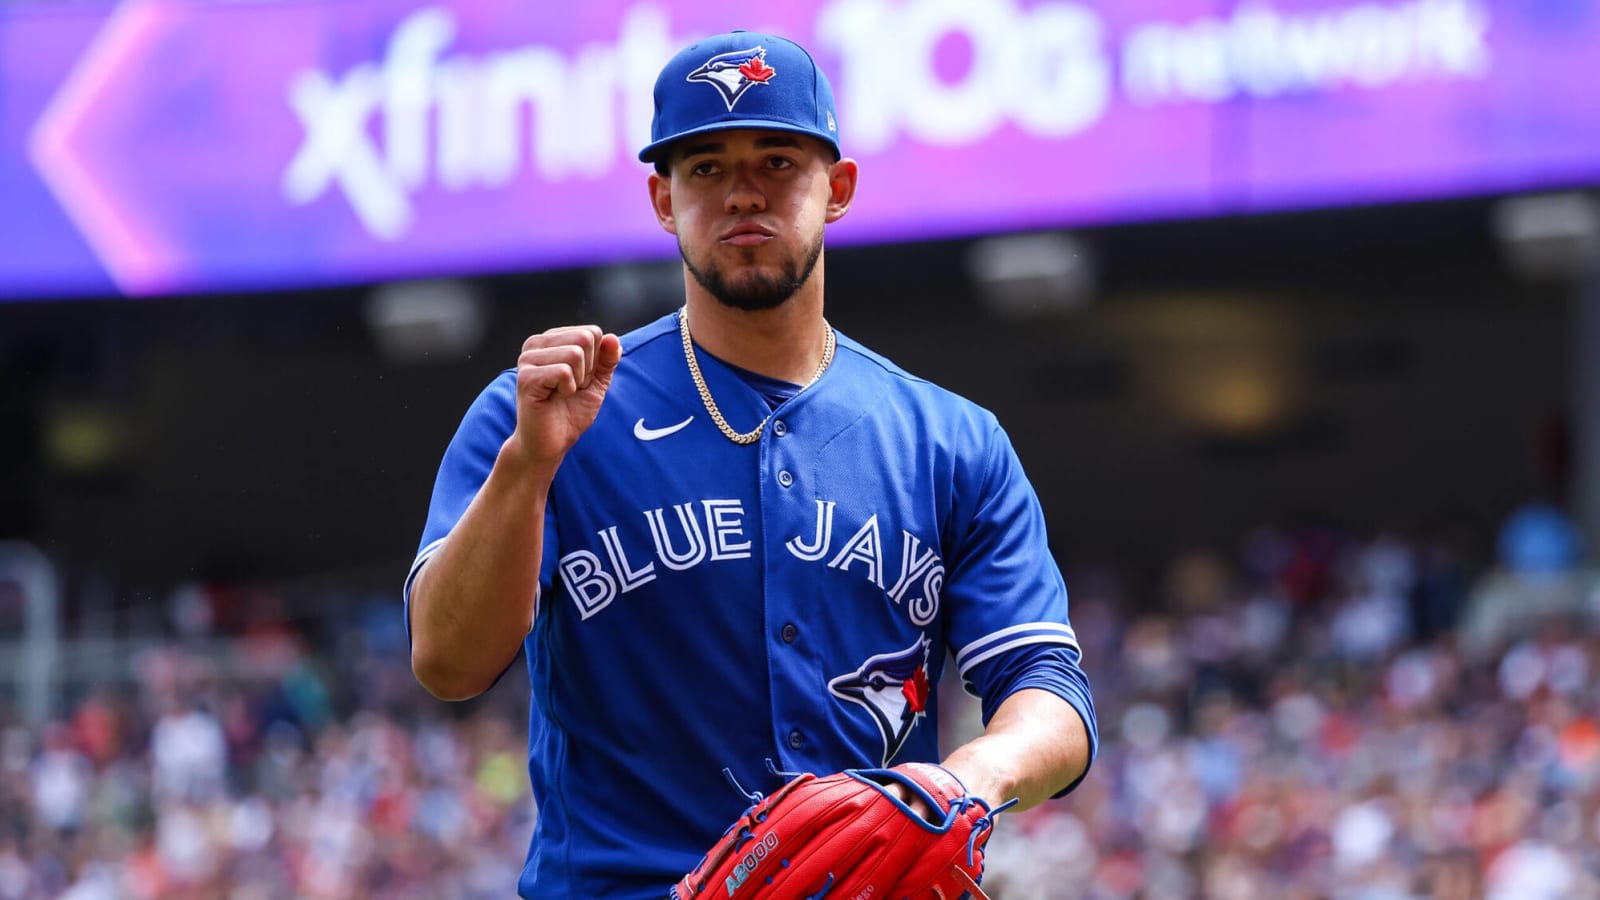 Blue Jays shuffle order of starting rotation out of All-Star break